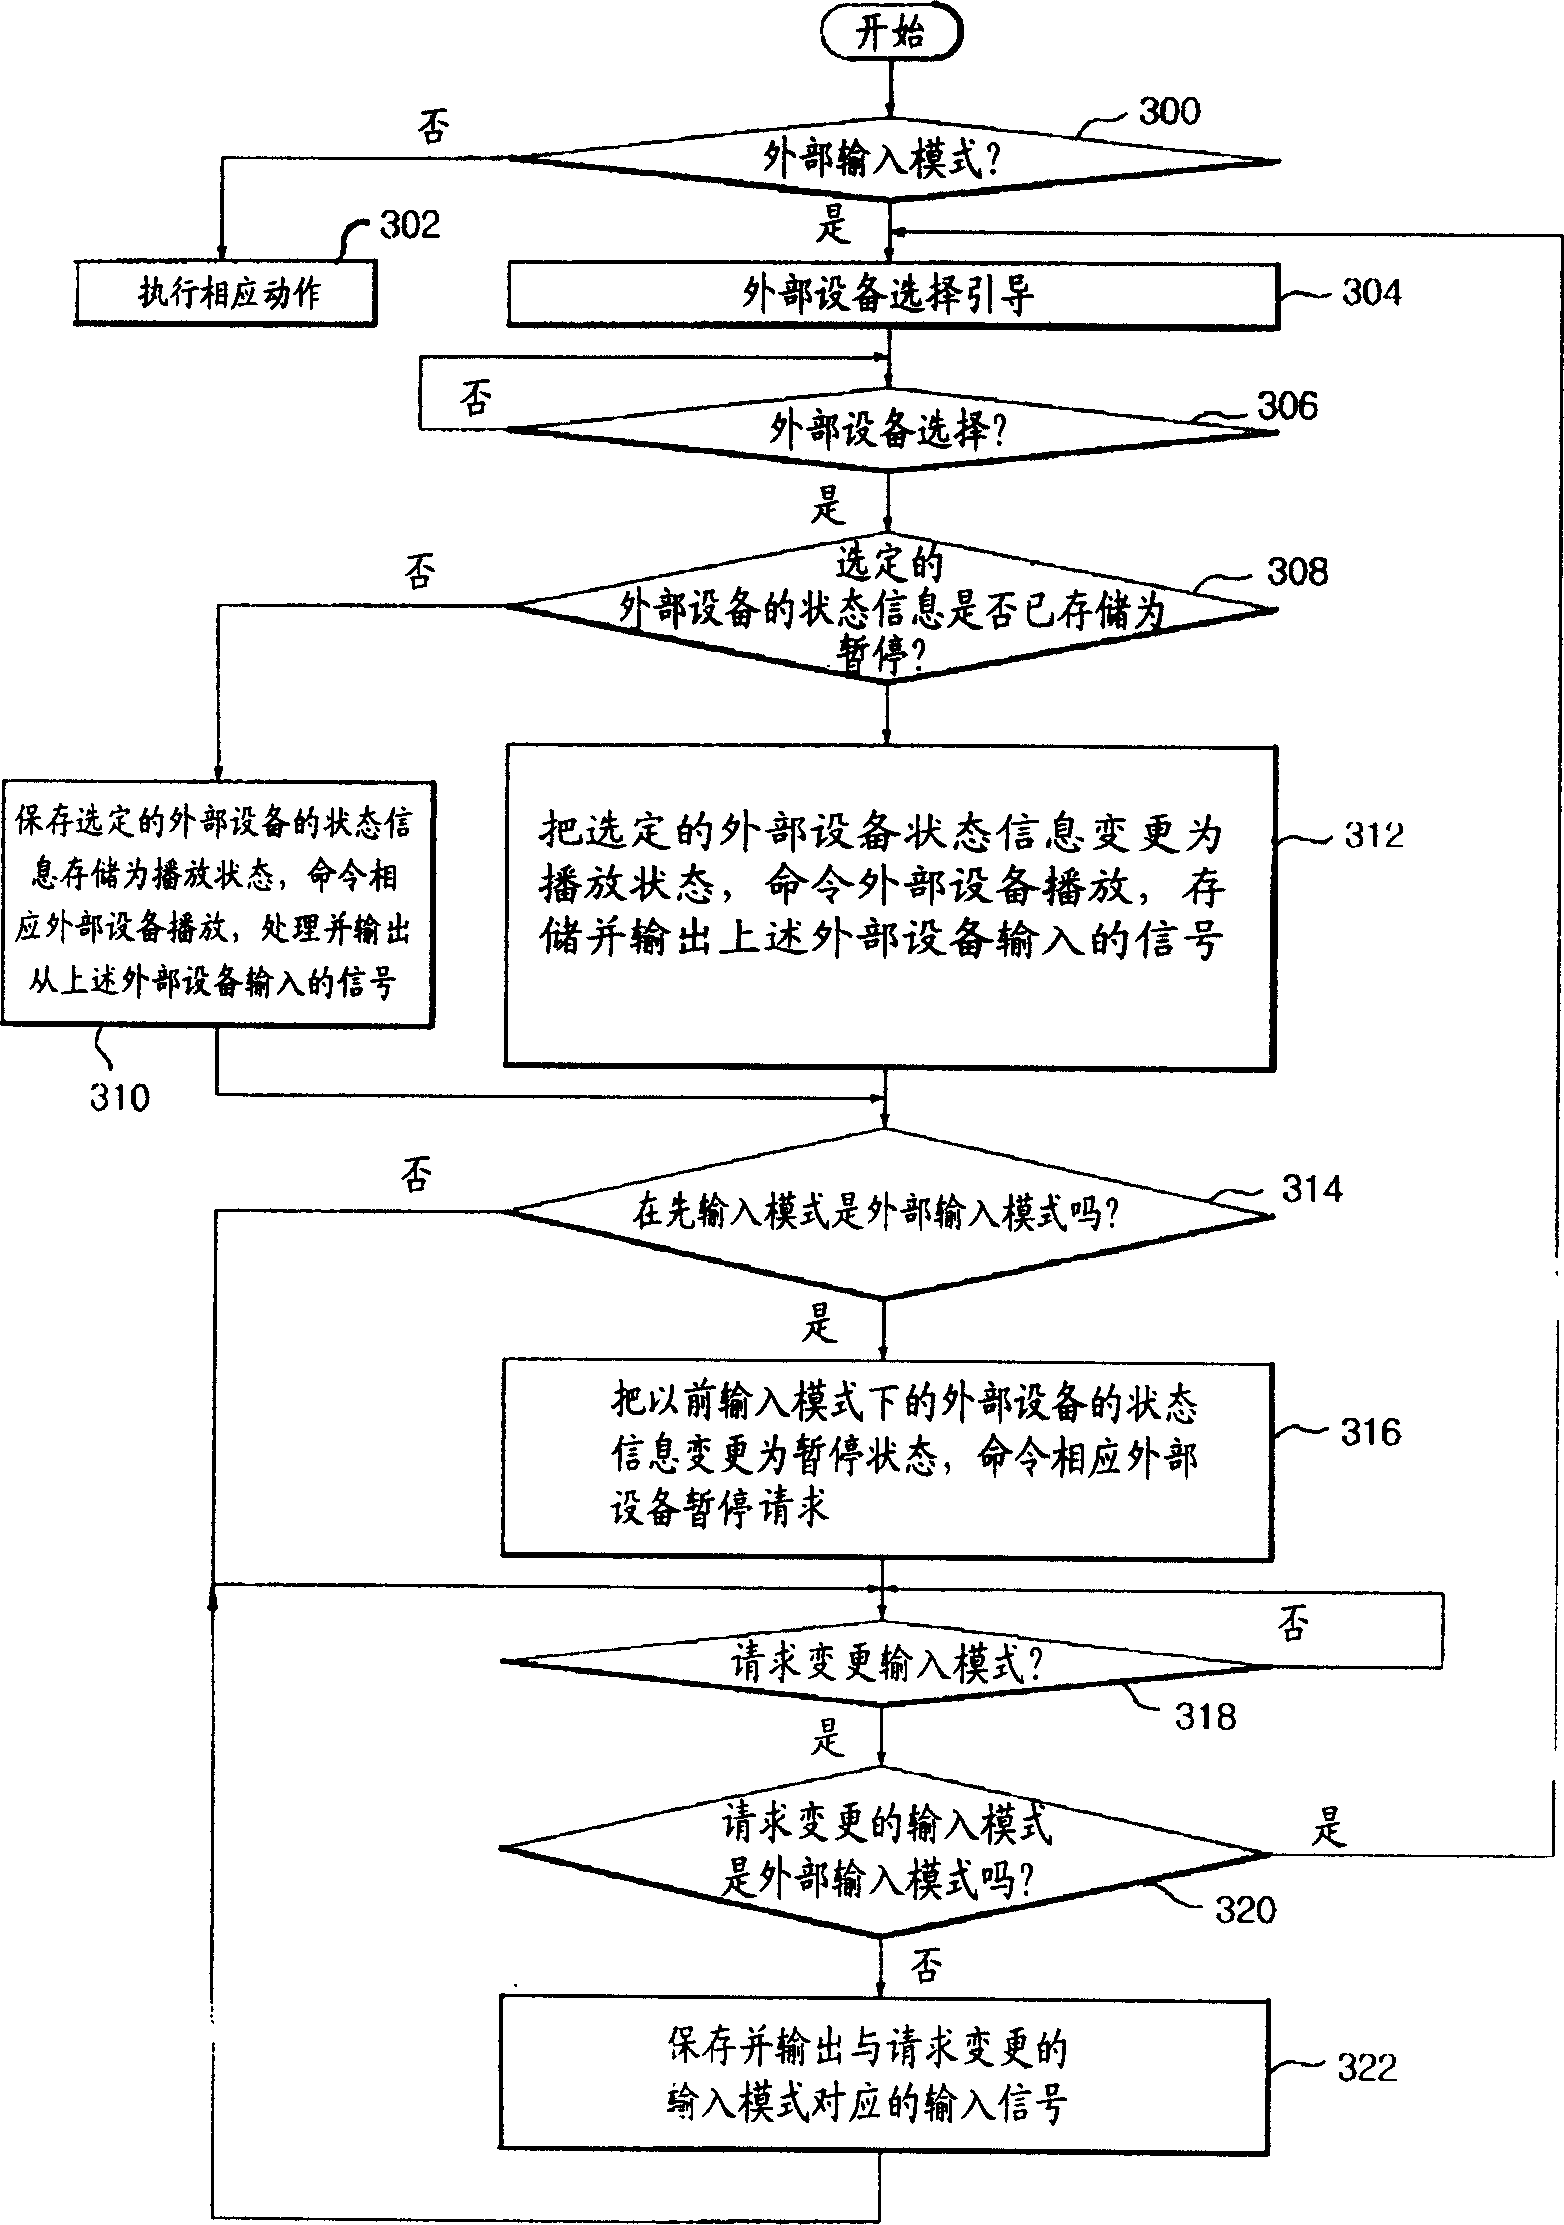 Controlling method of external apparatus of image displaying device